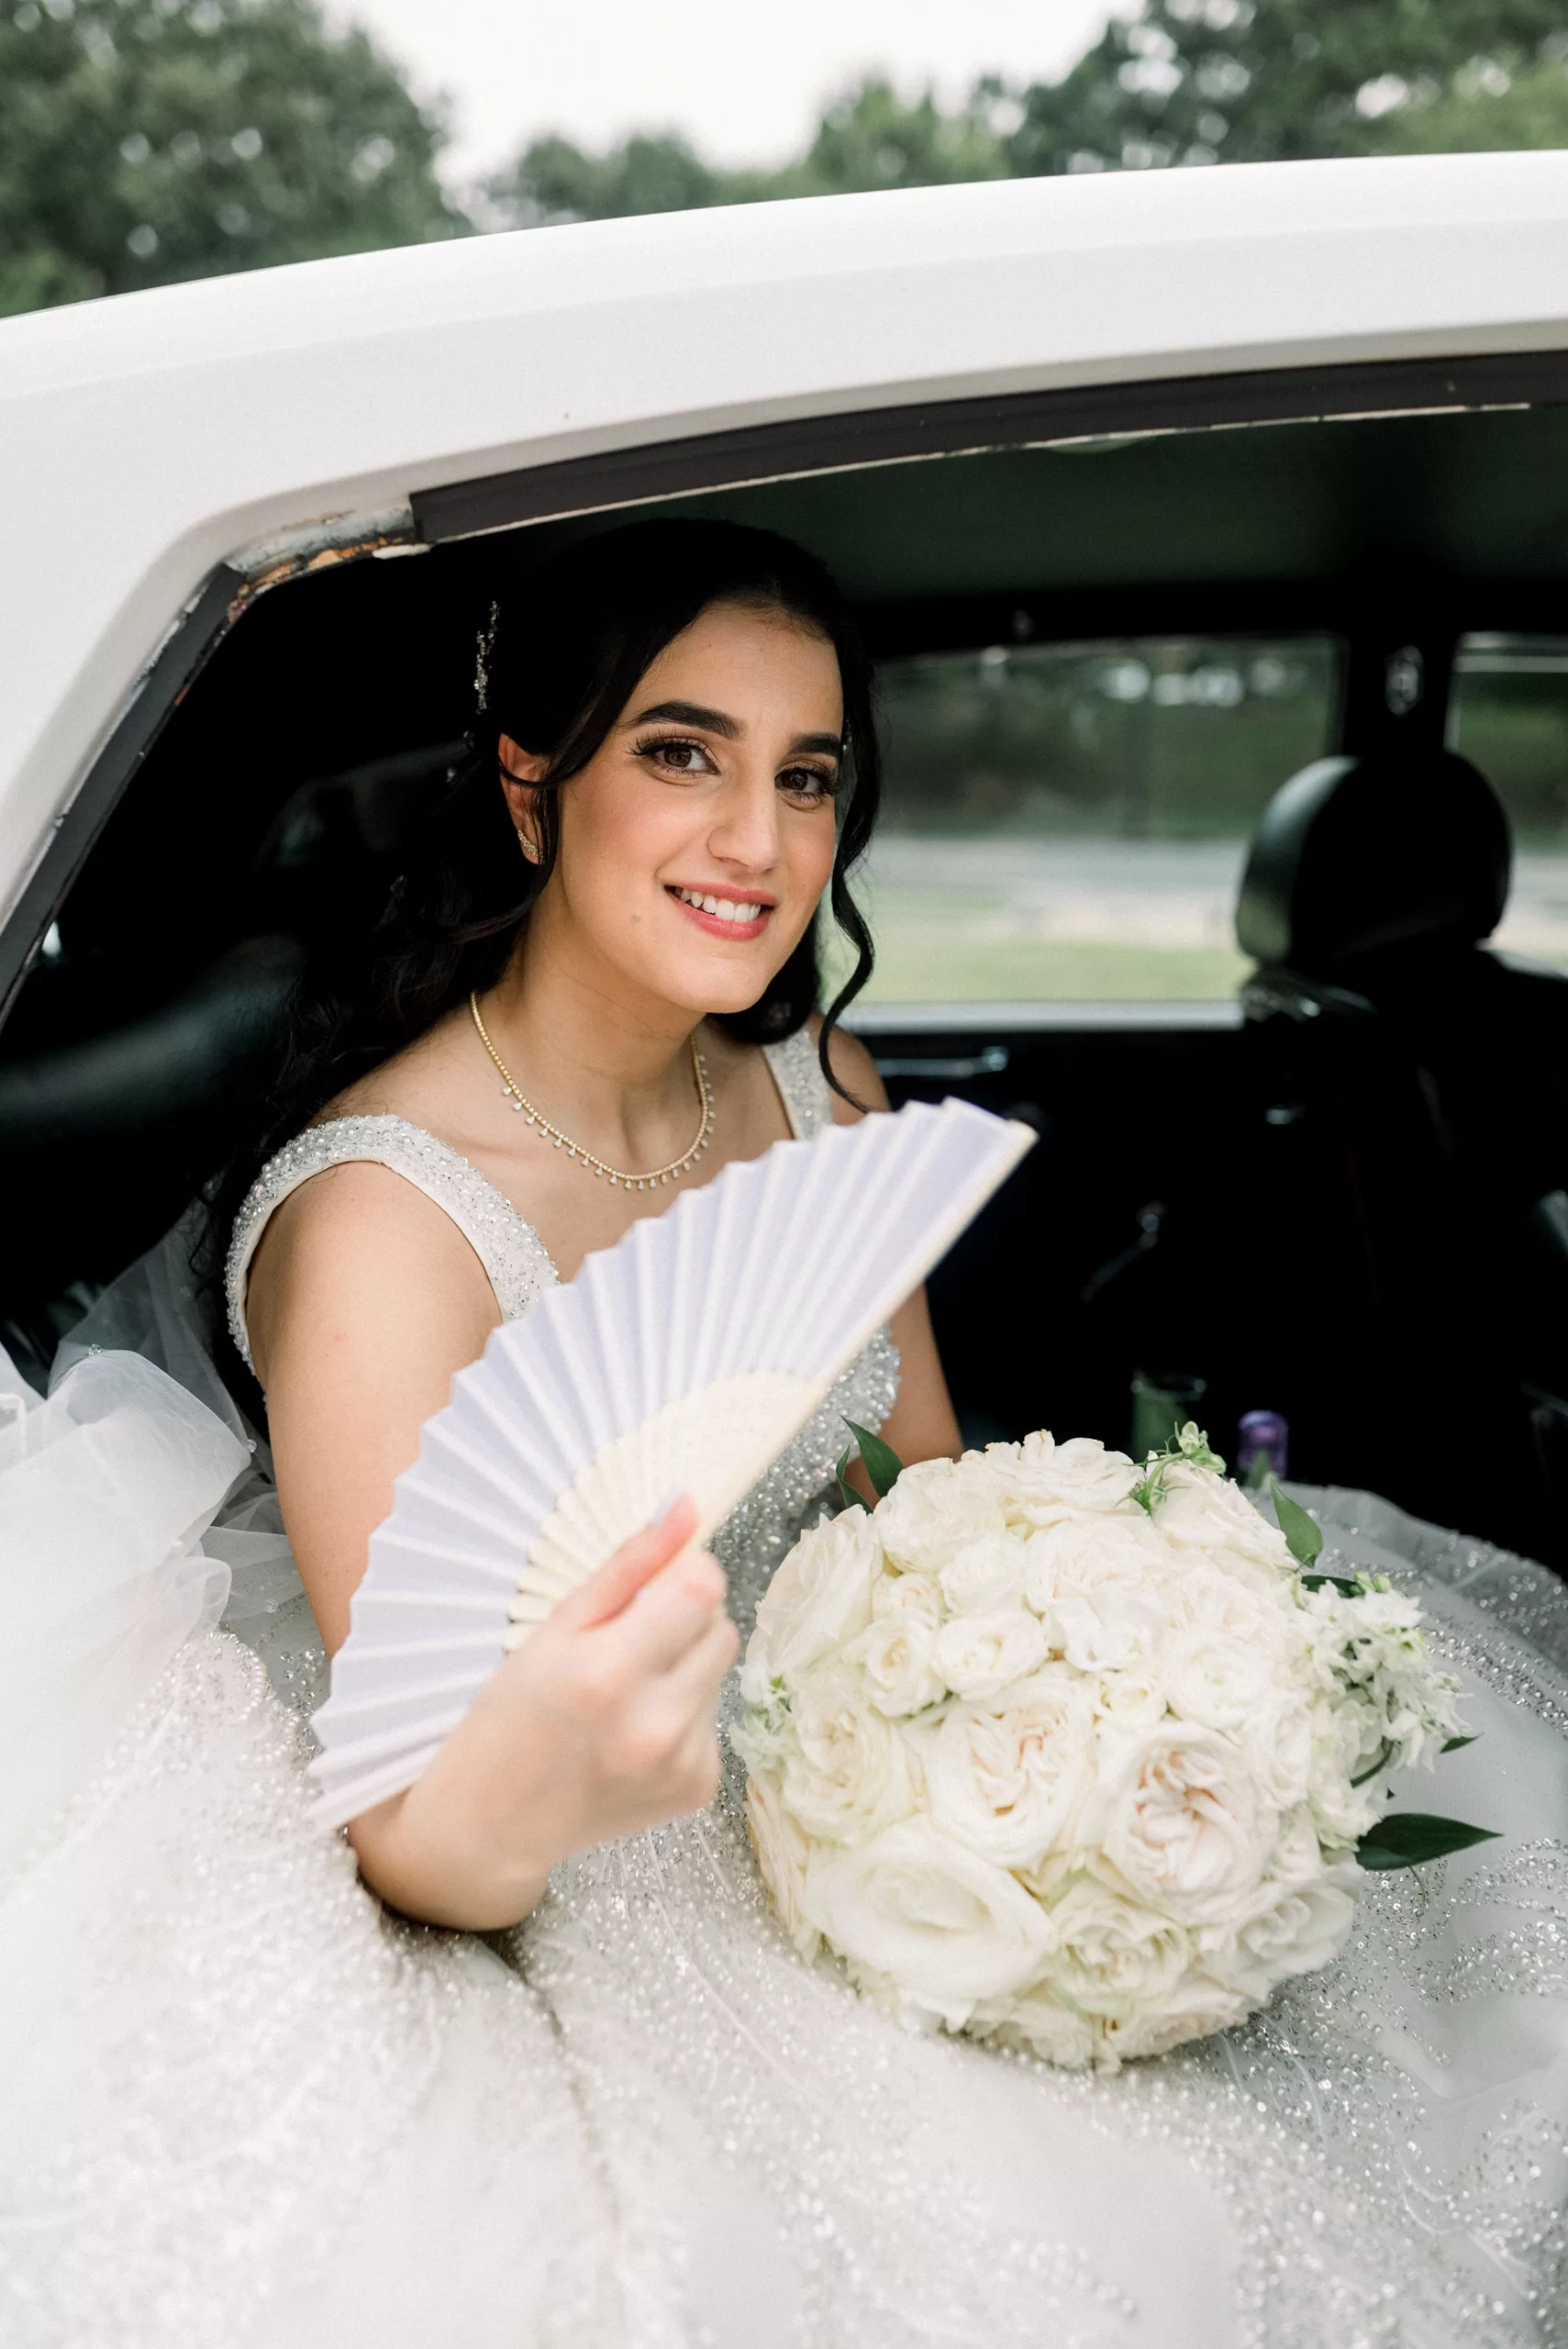 A bride fans herself while sitting in the back of a limo holding her large white bouquet